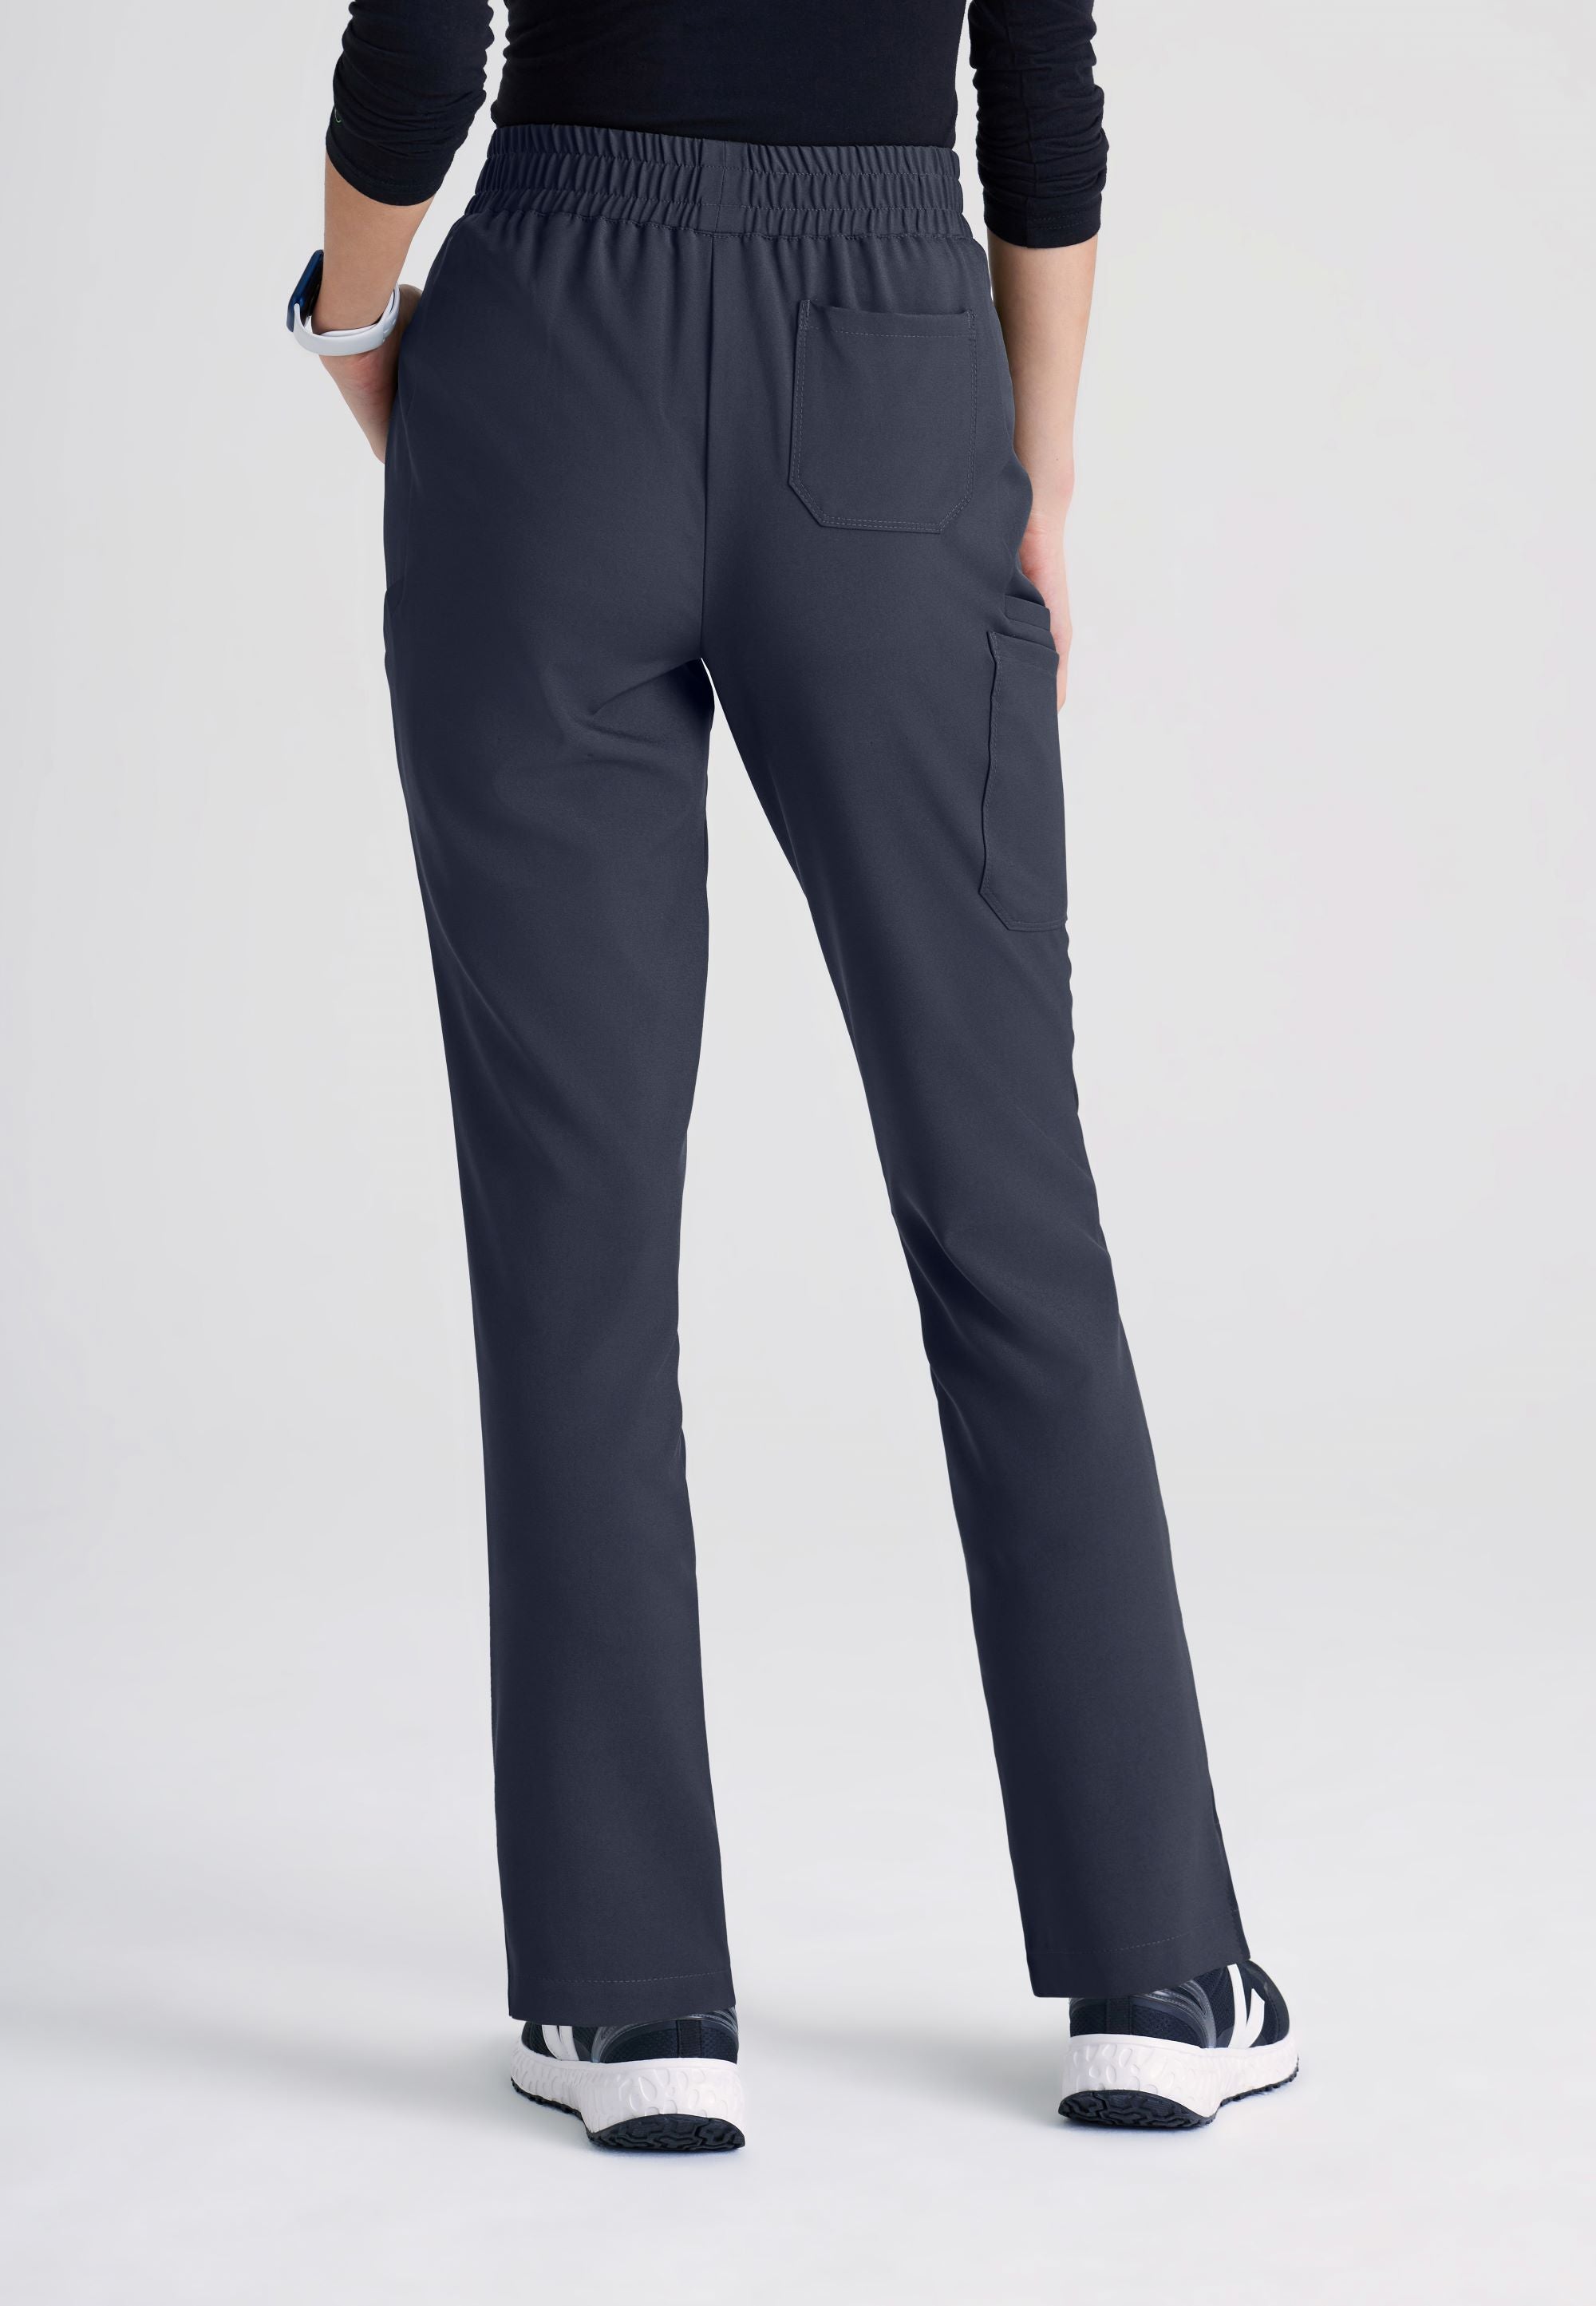 Barco Grey's Anatomy Evolve GSSP627 Cosmo 6 Pocket Tapered Pant 